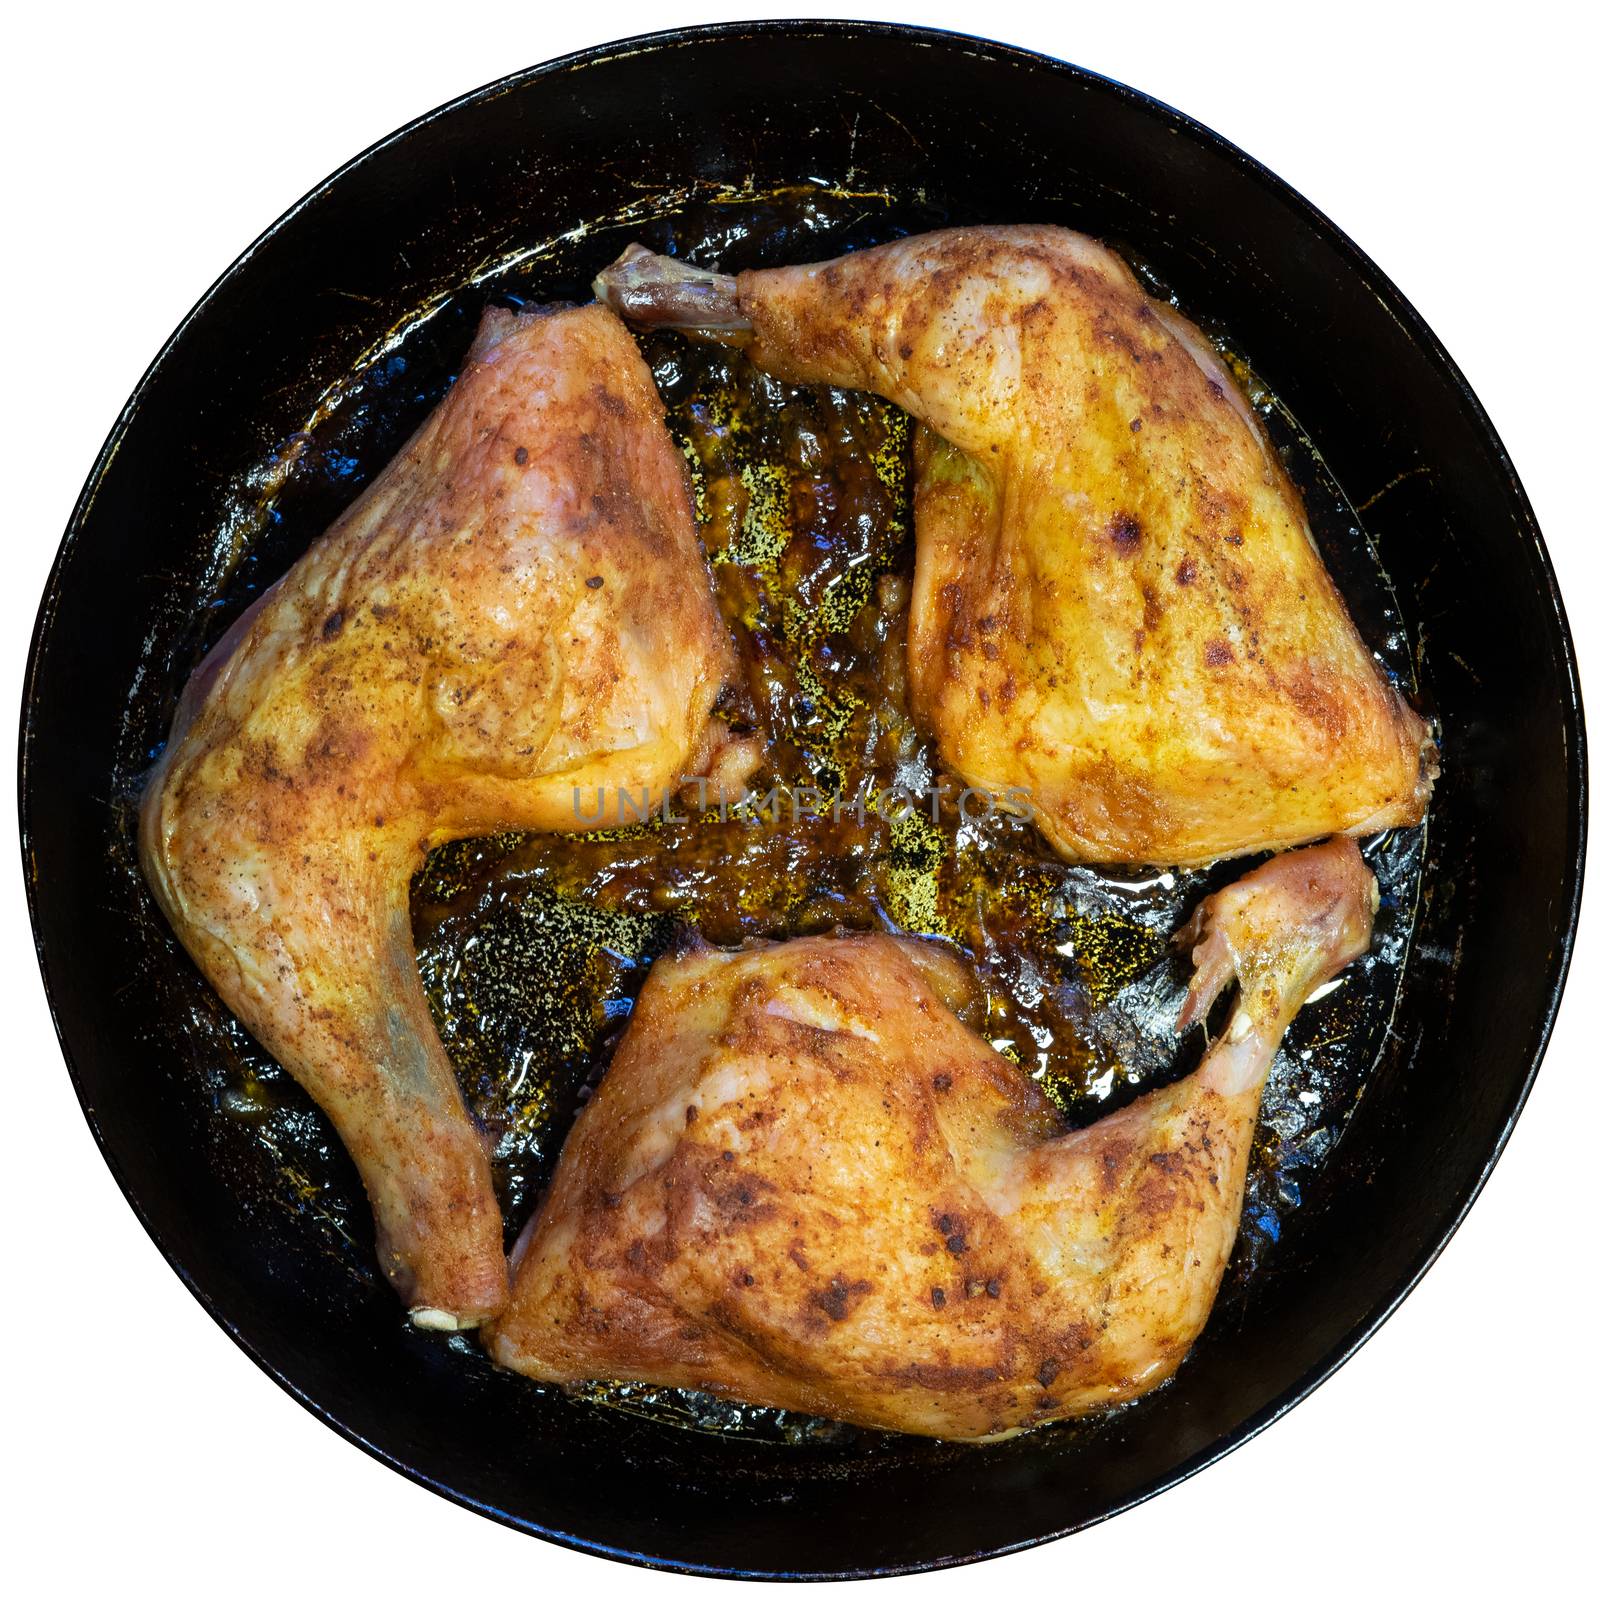 delicious baked chicken breasts in a frying pan by Serhii_Voroshchuk